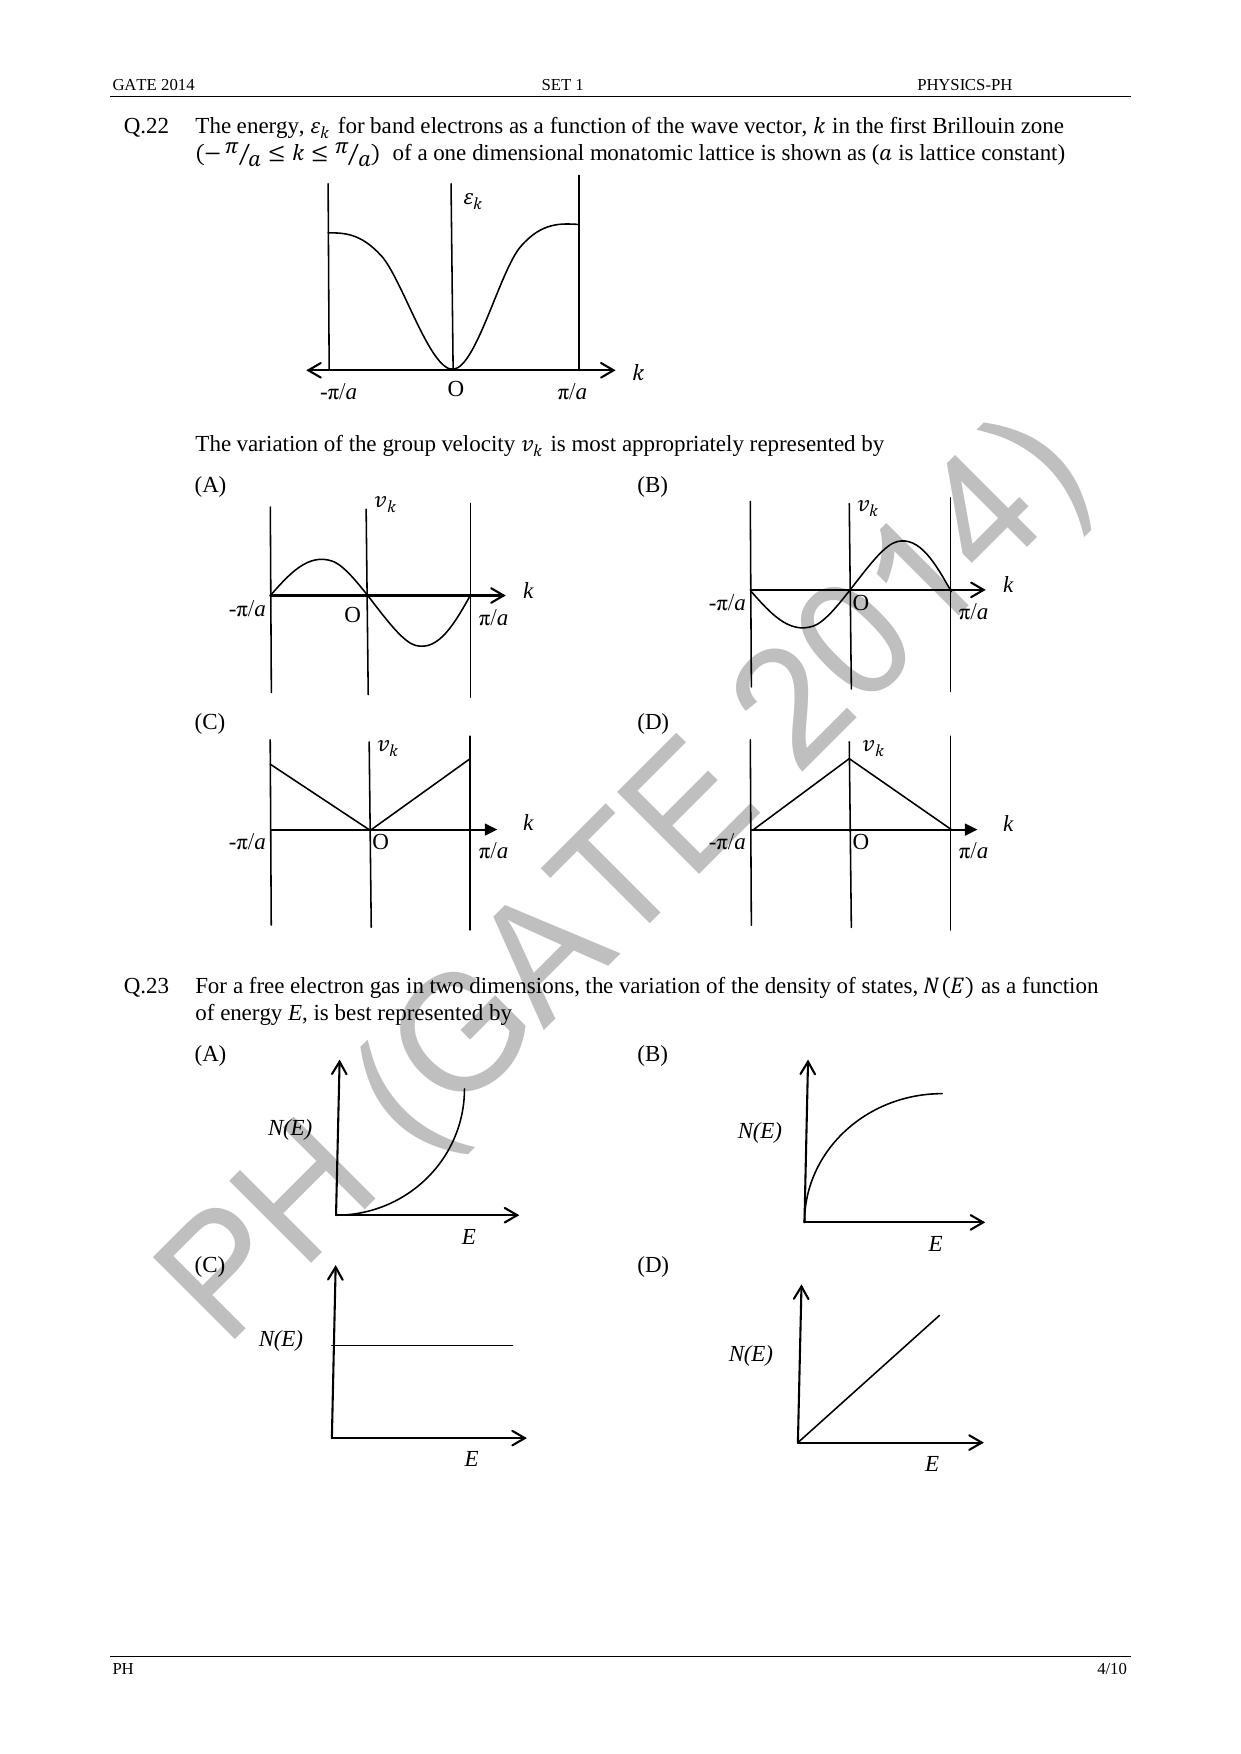 GATE 2014 Physics (PH) Question Paper with Answer Key - Page 11